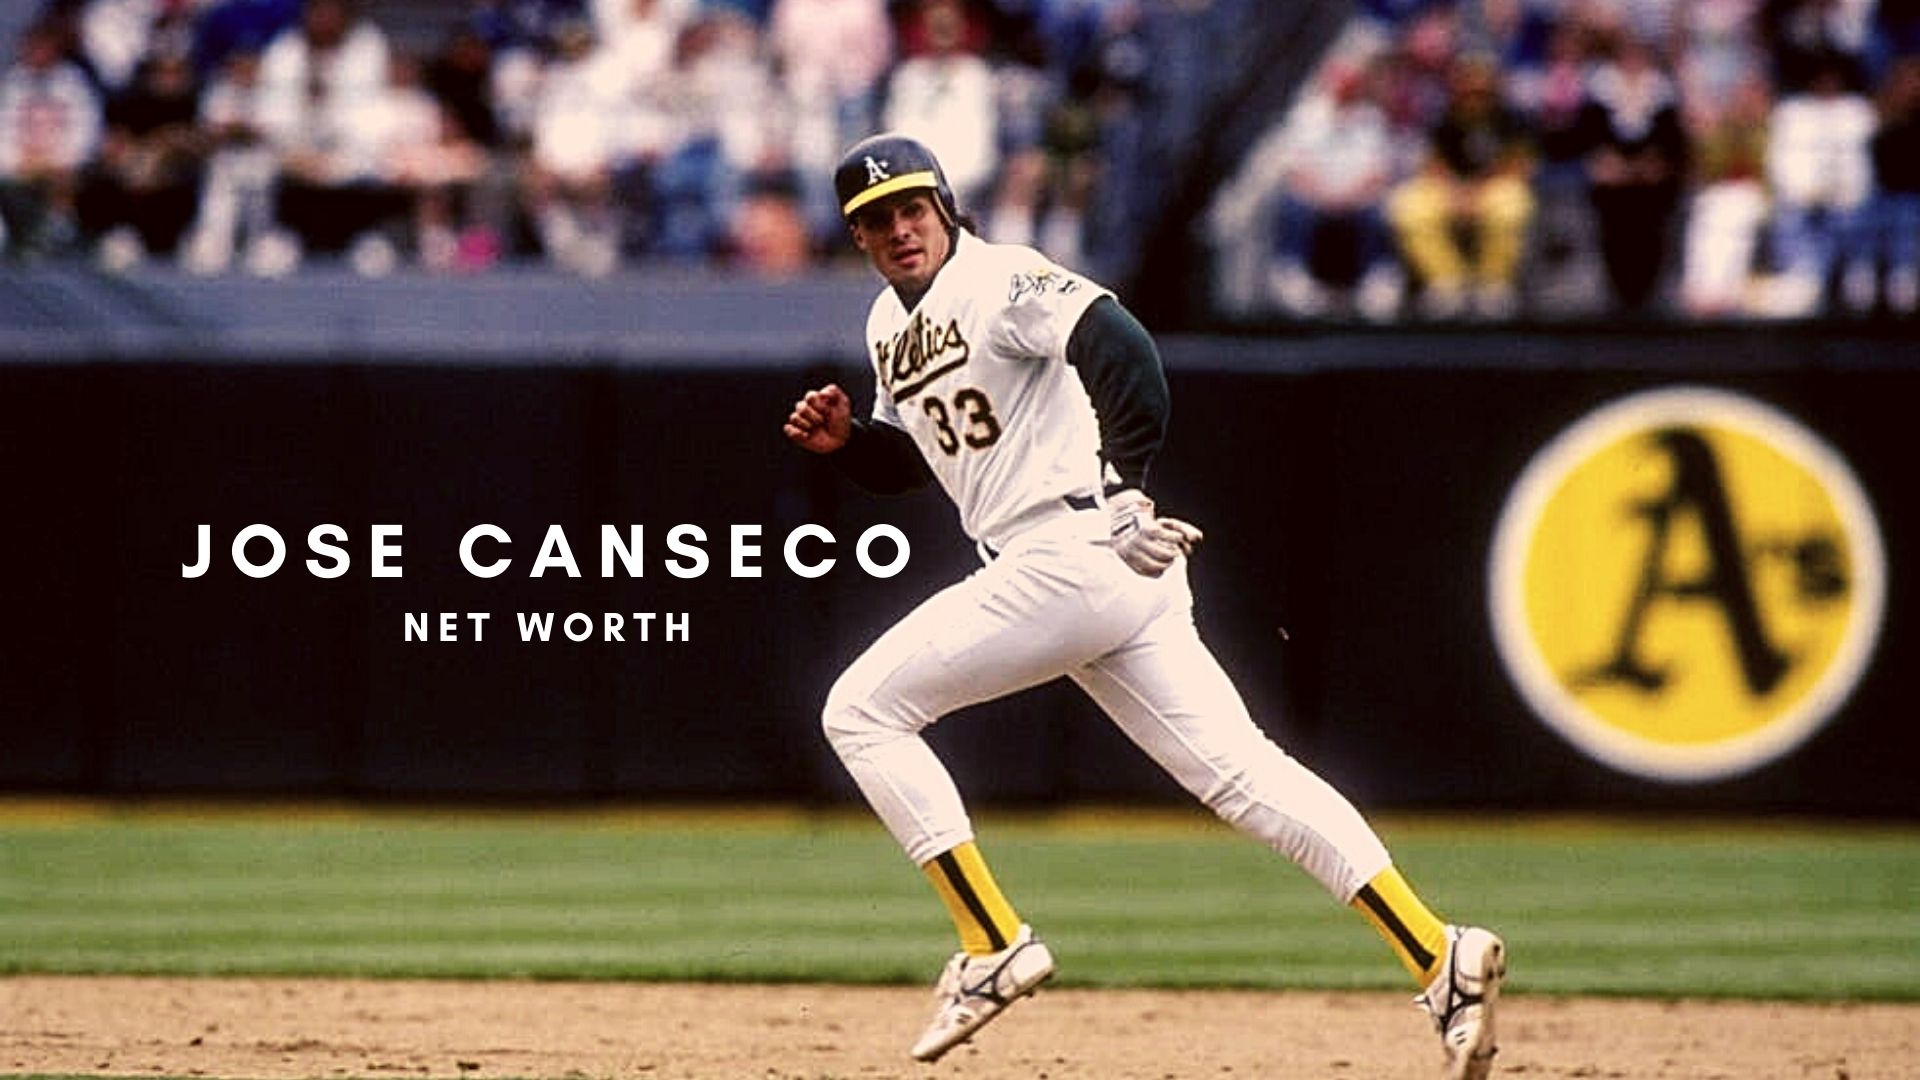 Jose Canseco 2021 – Net Worth, Career, Records, Personal Life and More